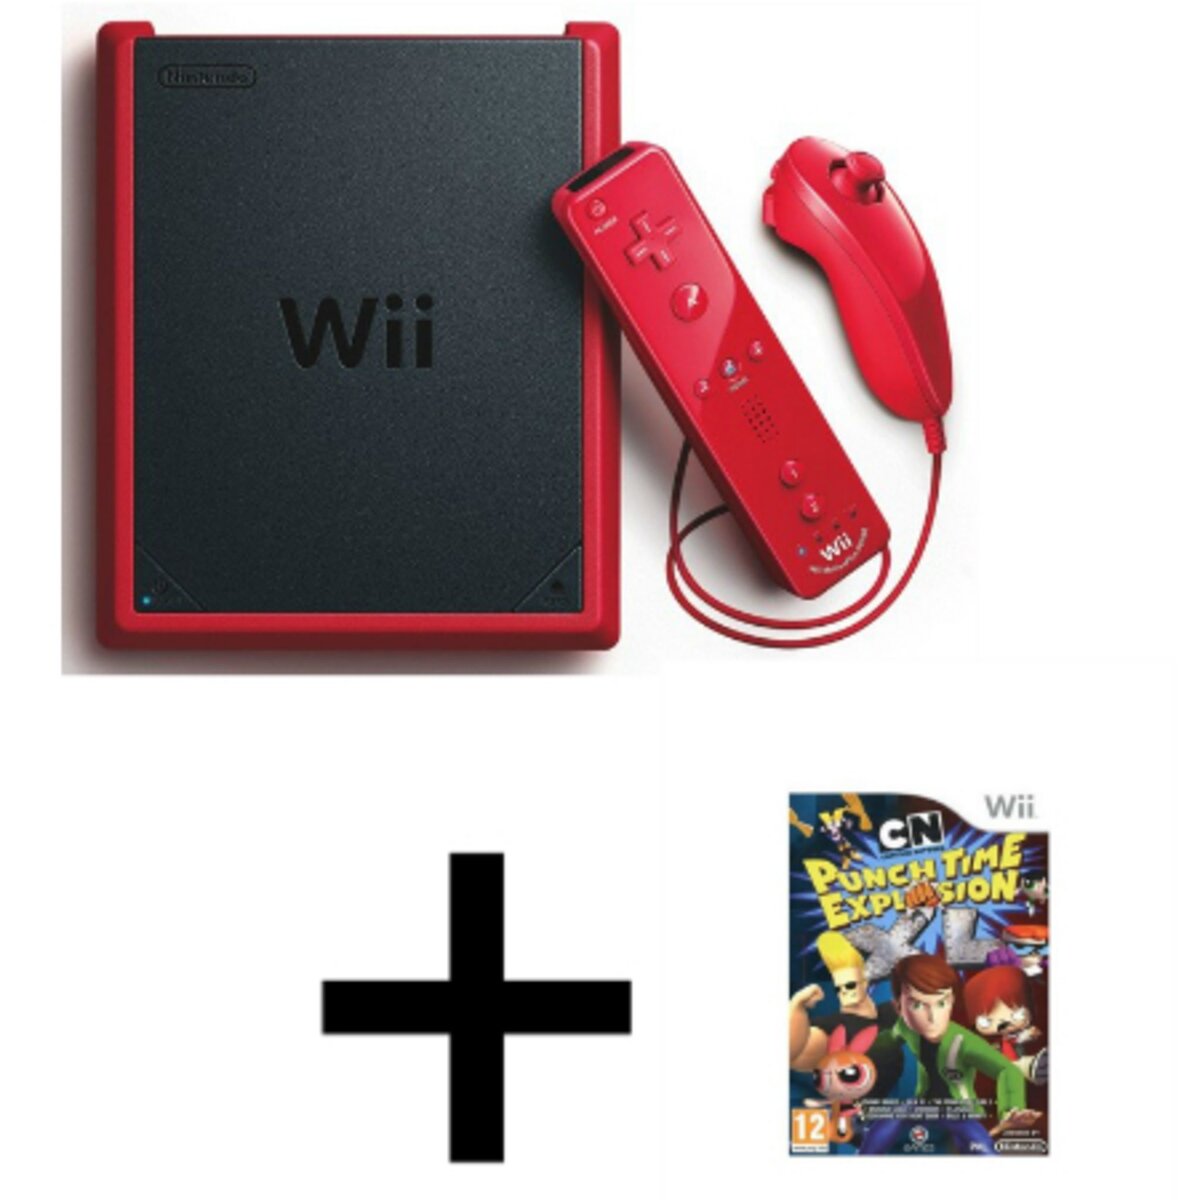 Wii Mini + Punch Time Explosion